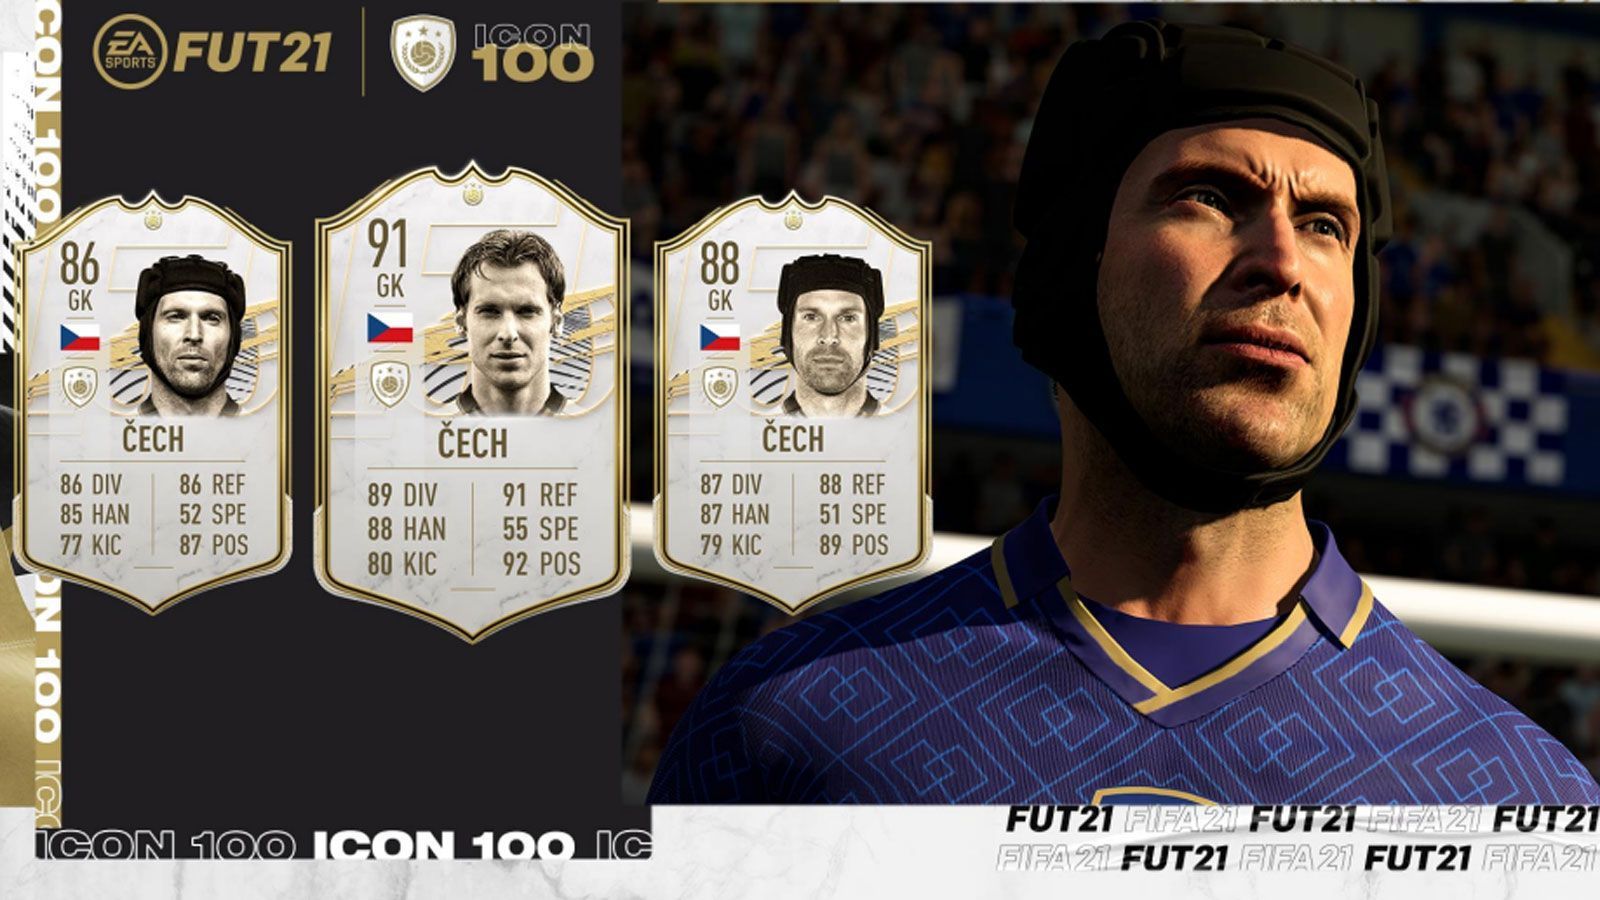 
                <strong>Petr Cech</strong><br>
                Position: TorBasis-Icon-Rating: 86Mid-Icon-Rating: 88Prime-Icon-Rating: 91
              